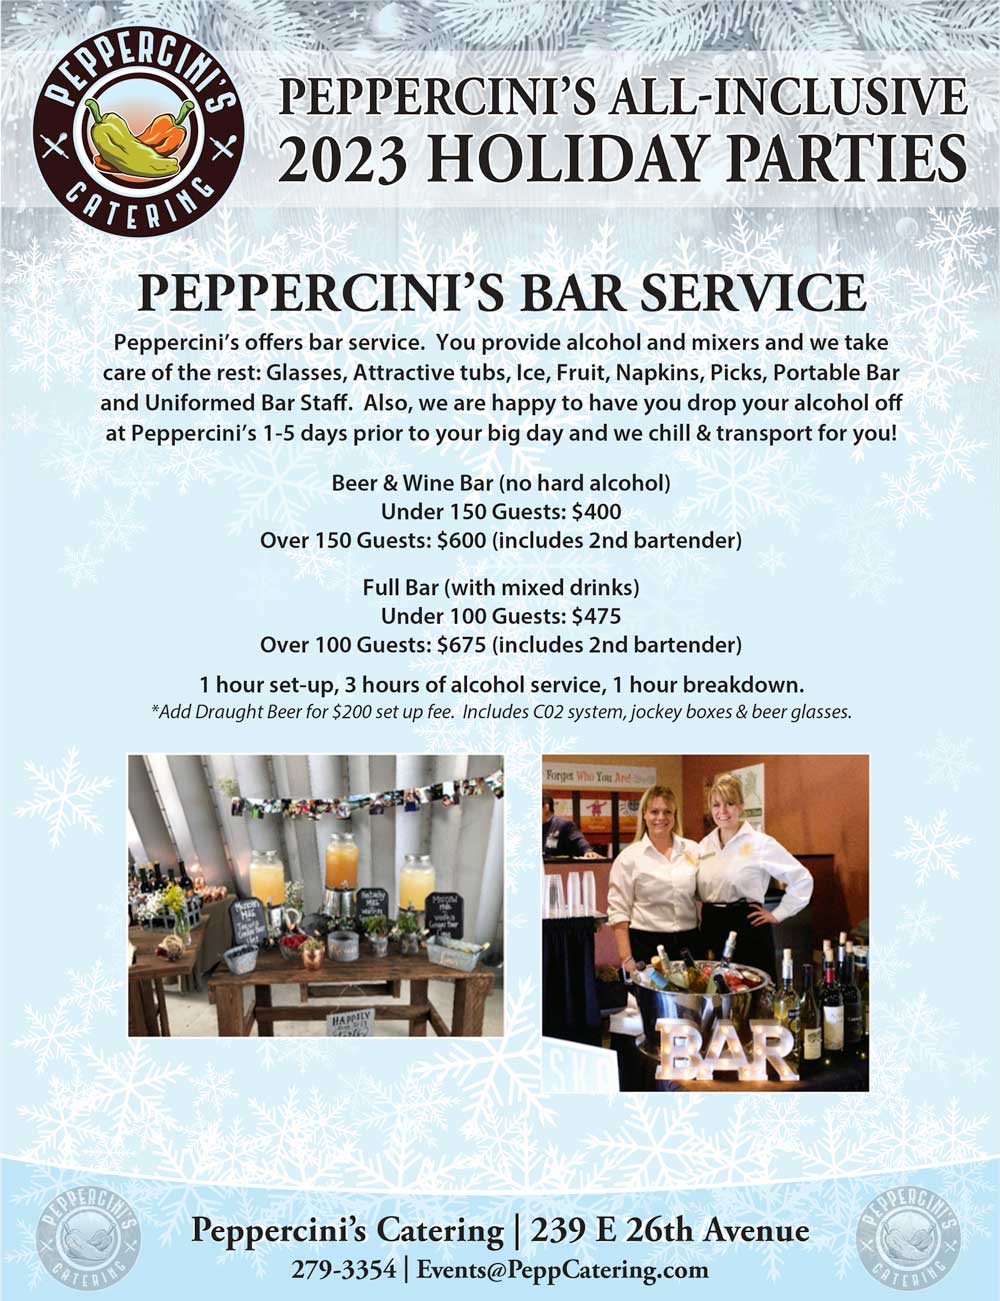 https://peppcatering.com/wp-content/uploads/peppercinis_holiday_party_2023_p2.jpg